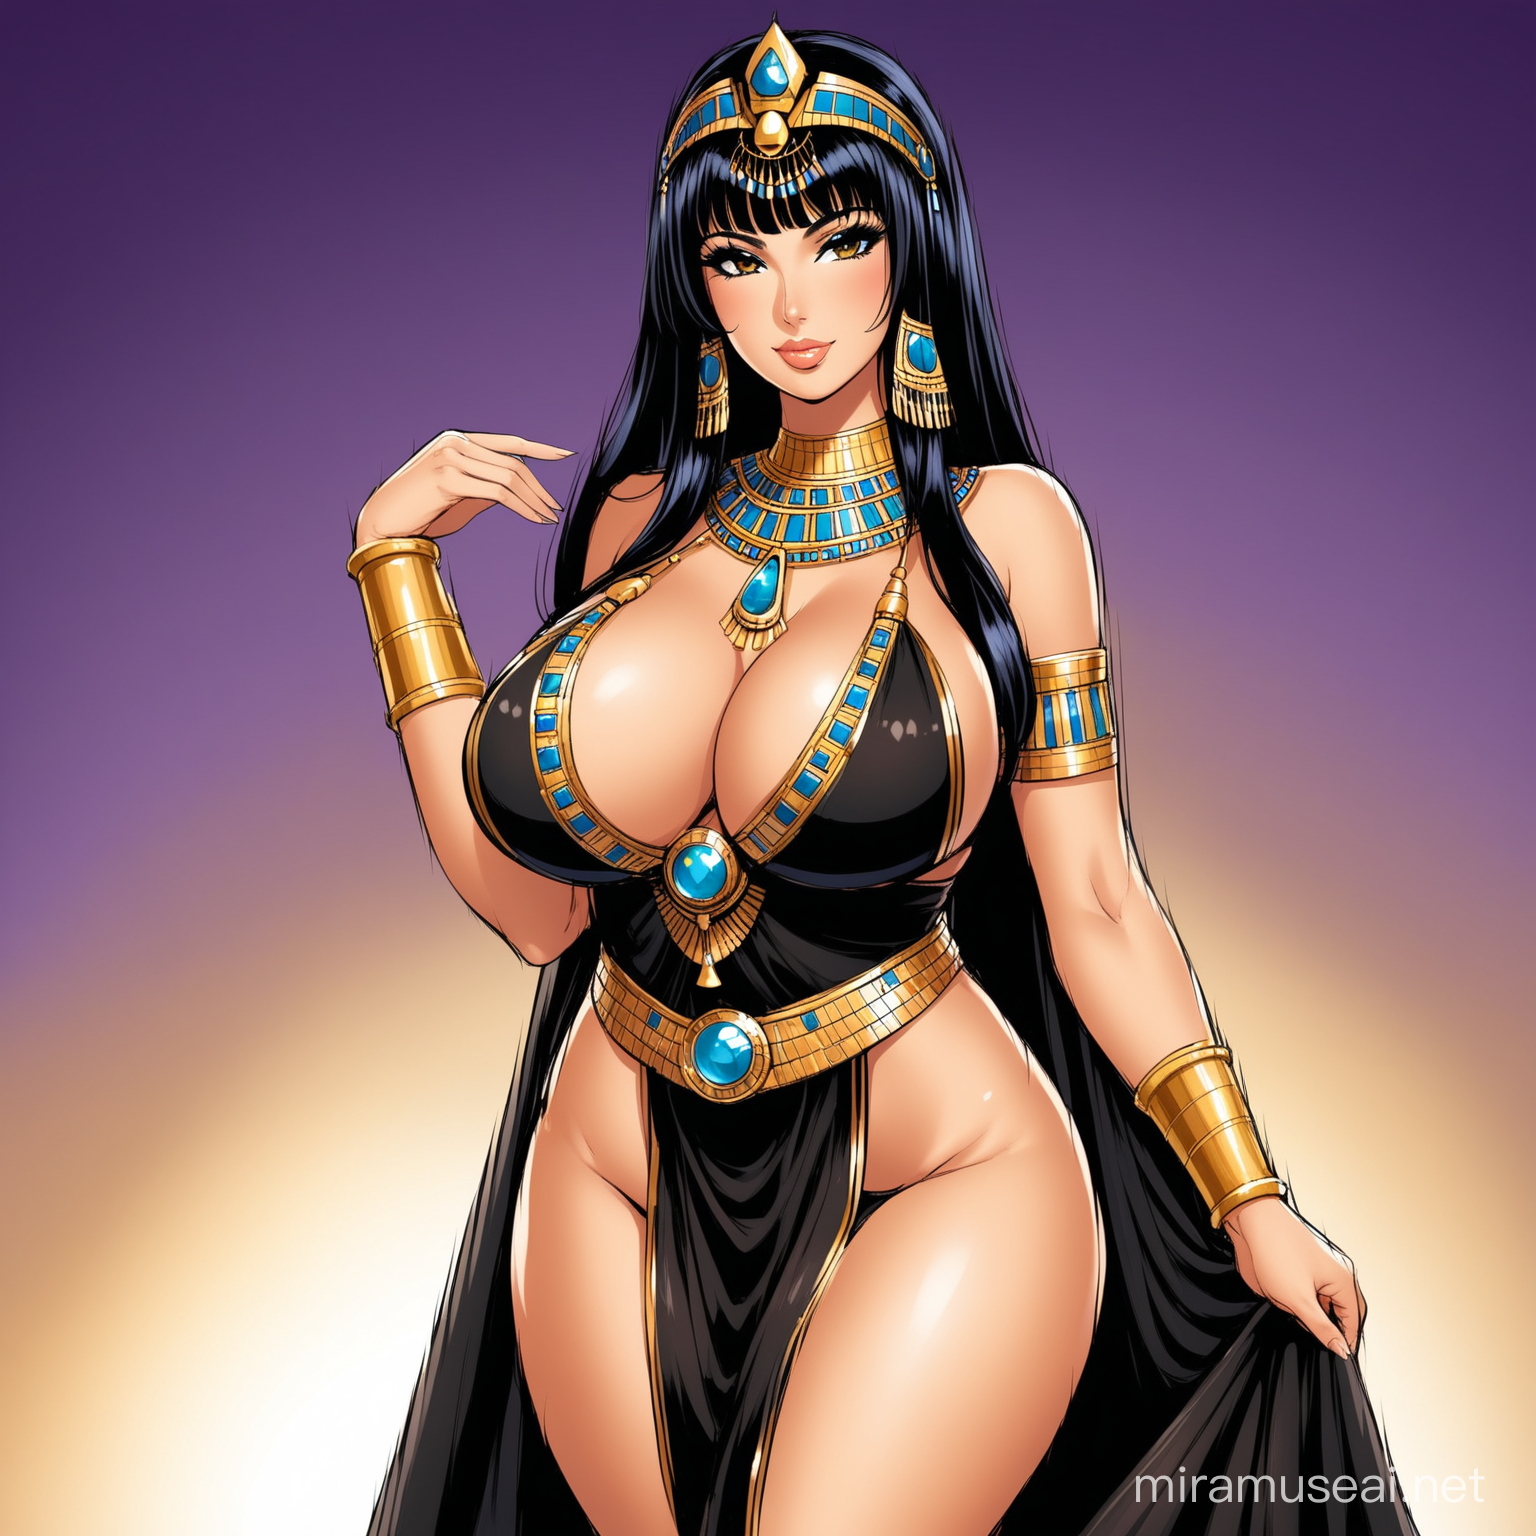 Exquisite Cleopatra Portrait Curvy Beauty in Egyptian Gown and Diadem